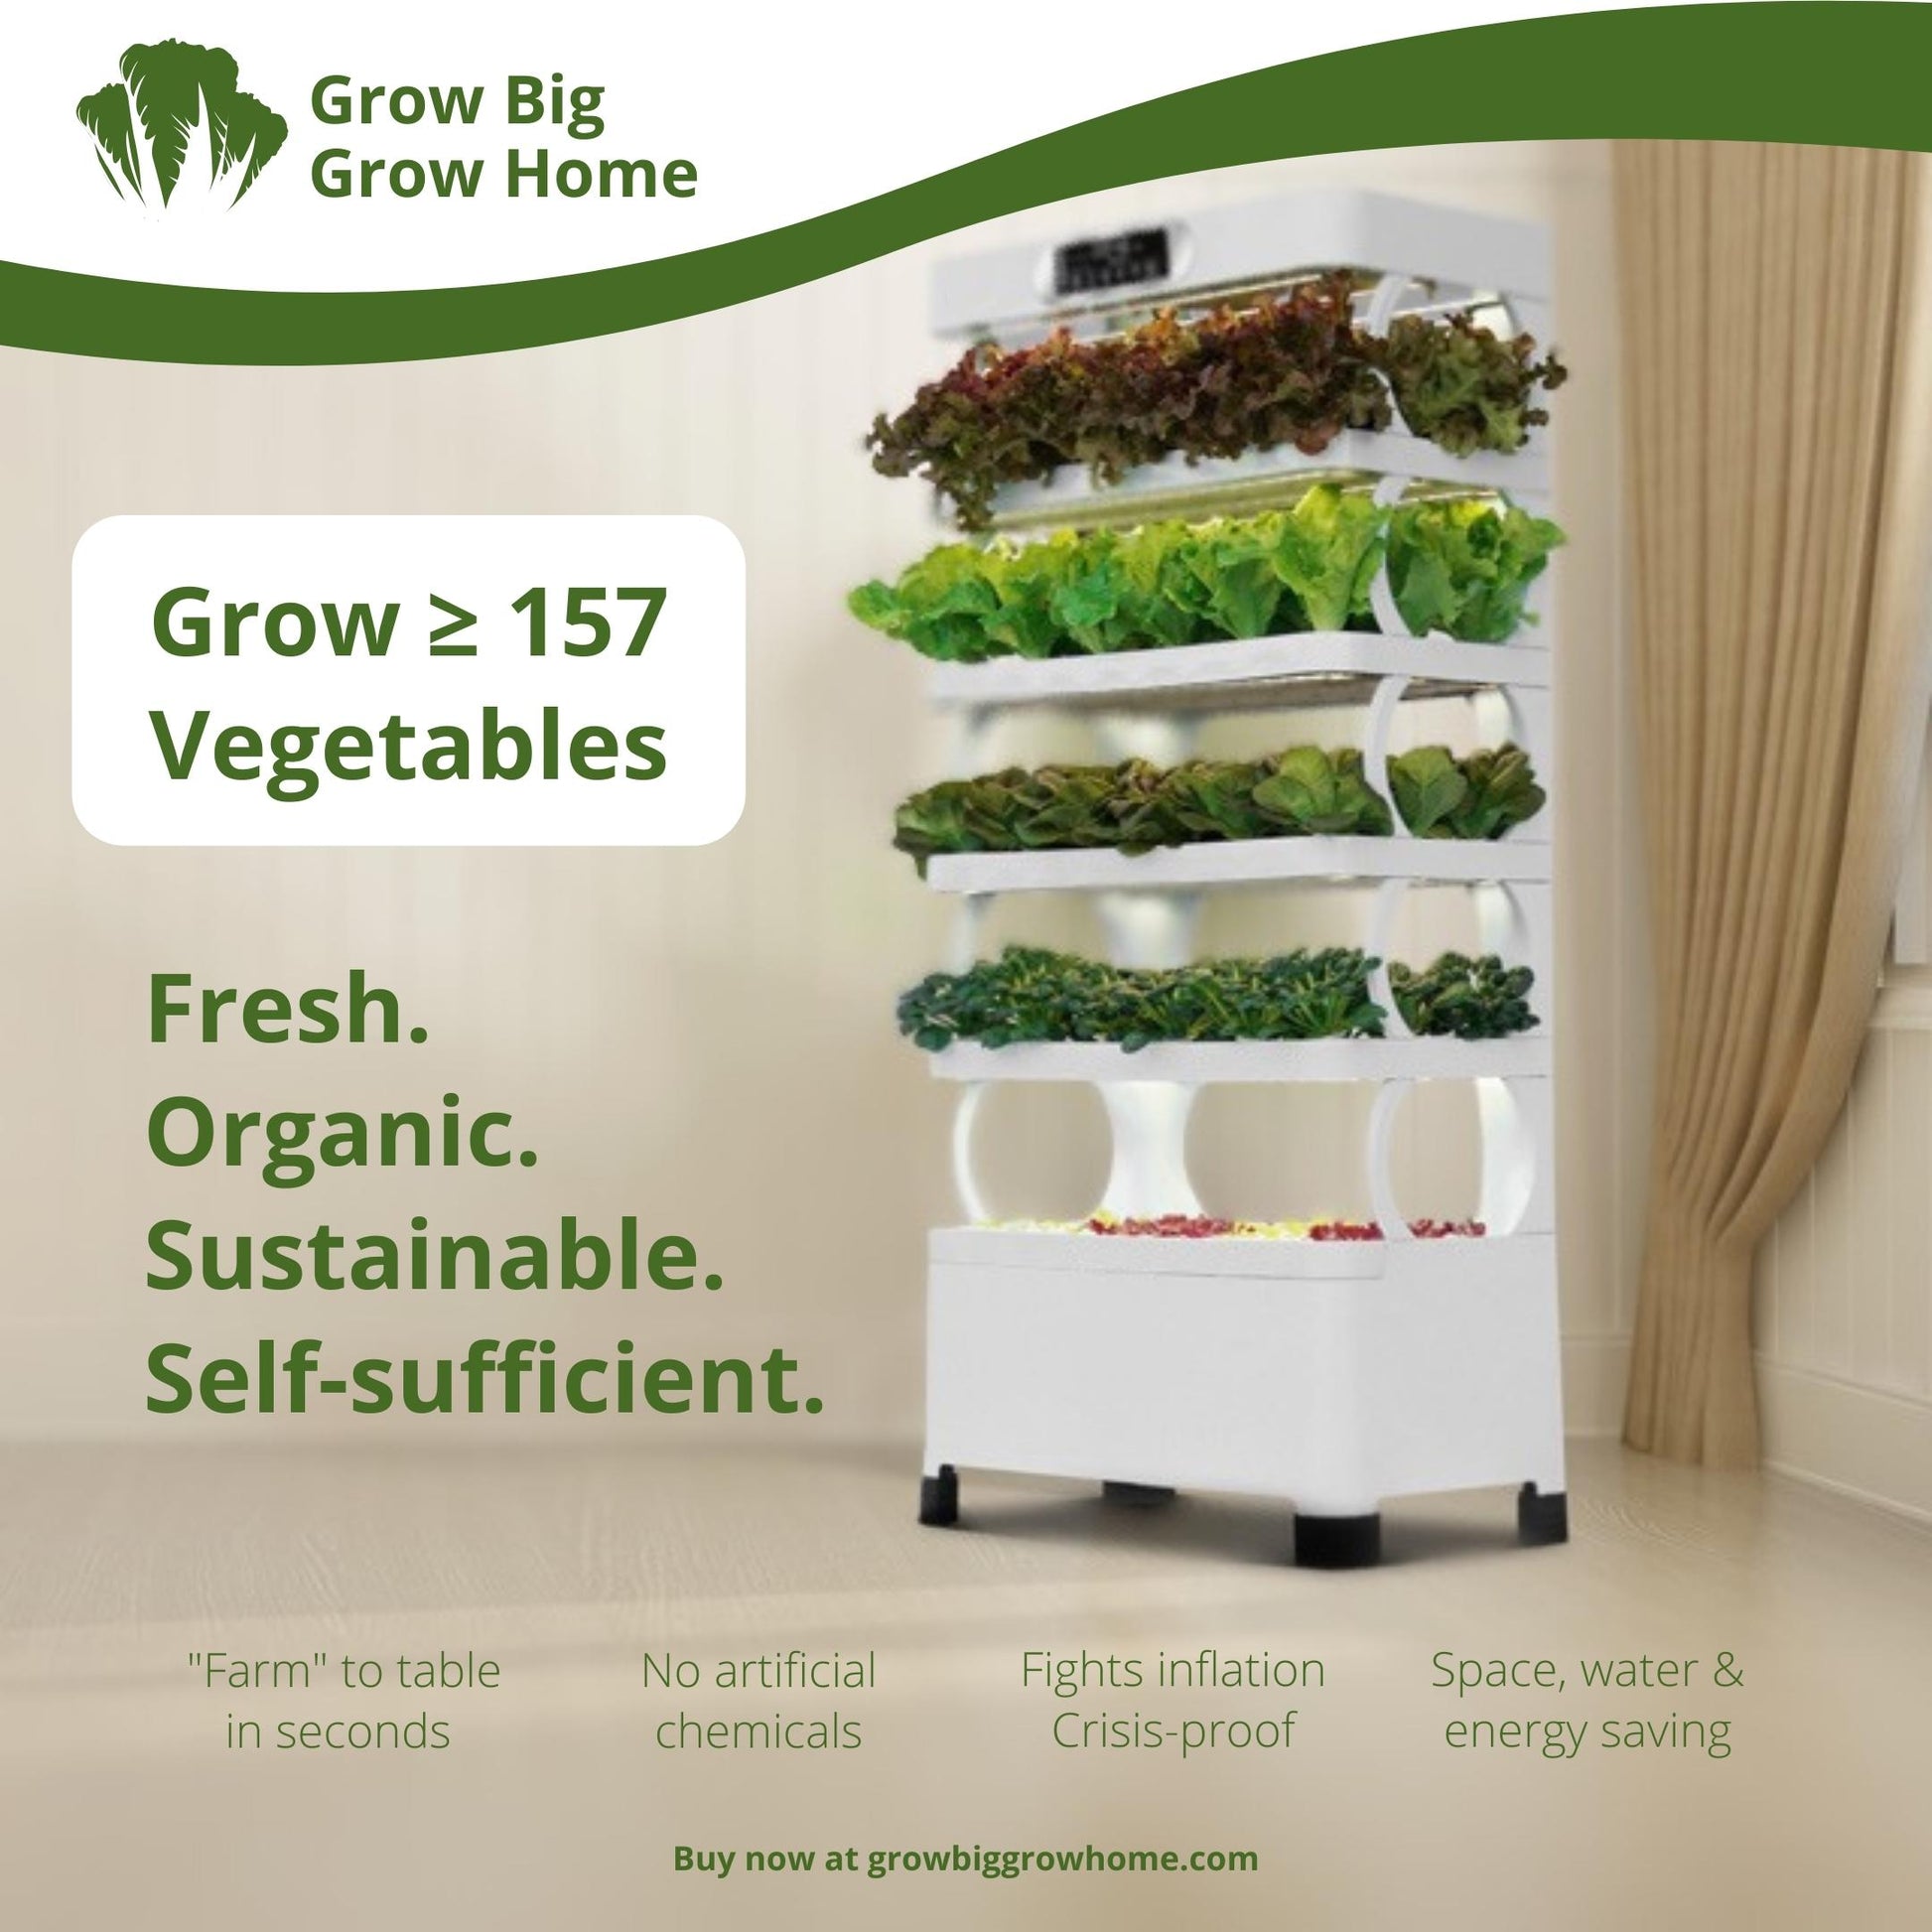 High-yield Hydroponics Farm Filled with Organic, Fresh Produce & Greens. Self-sufficient & Sustainable. Farm to fork in seconds. Pesticide-free. Crisis-proof food supply.